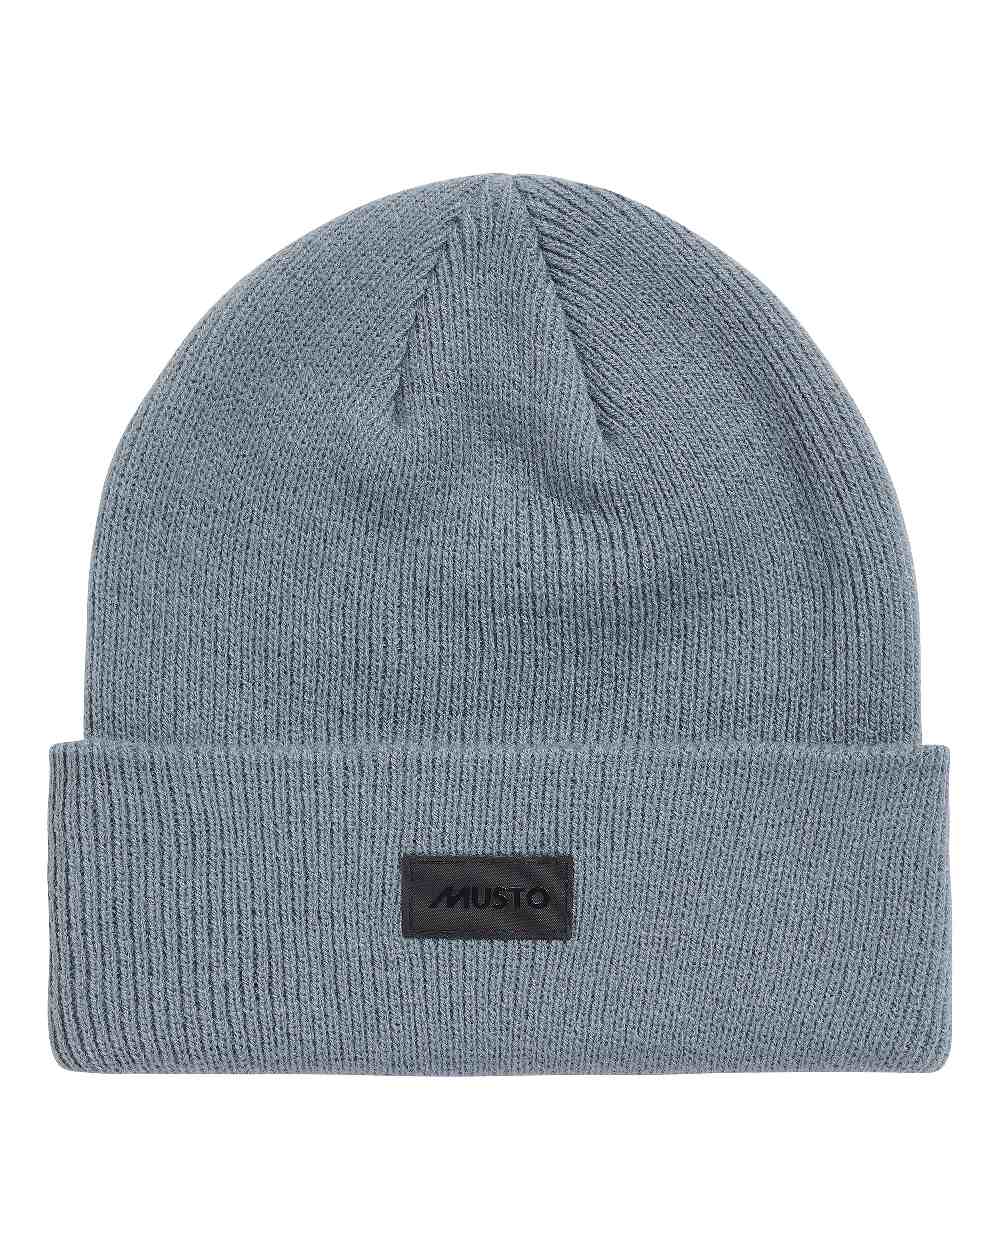 Musto Shaker Cuff Beanie in Stormy Weather 